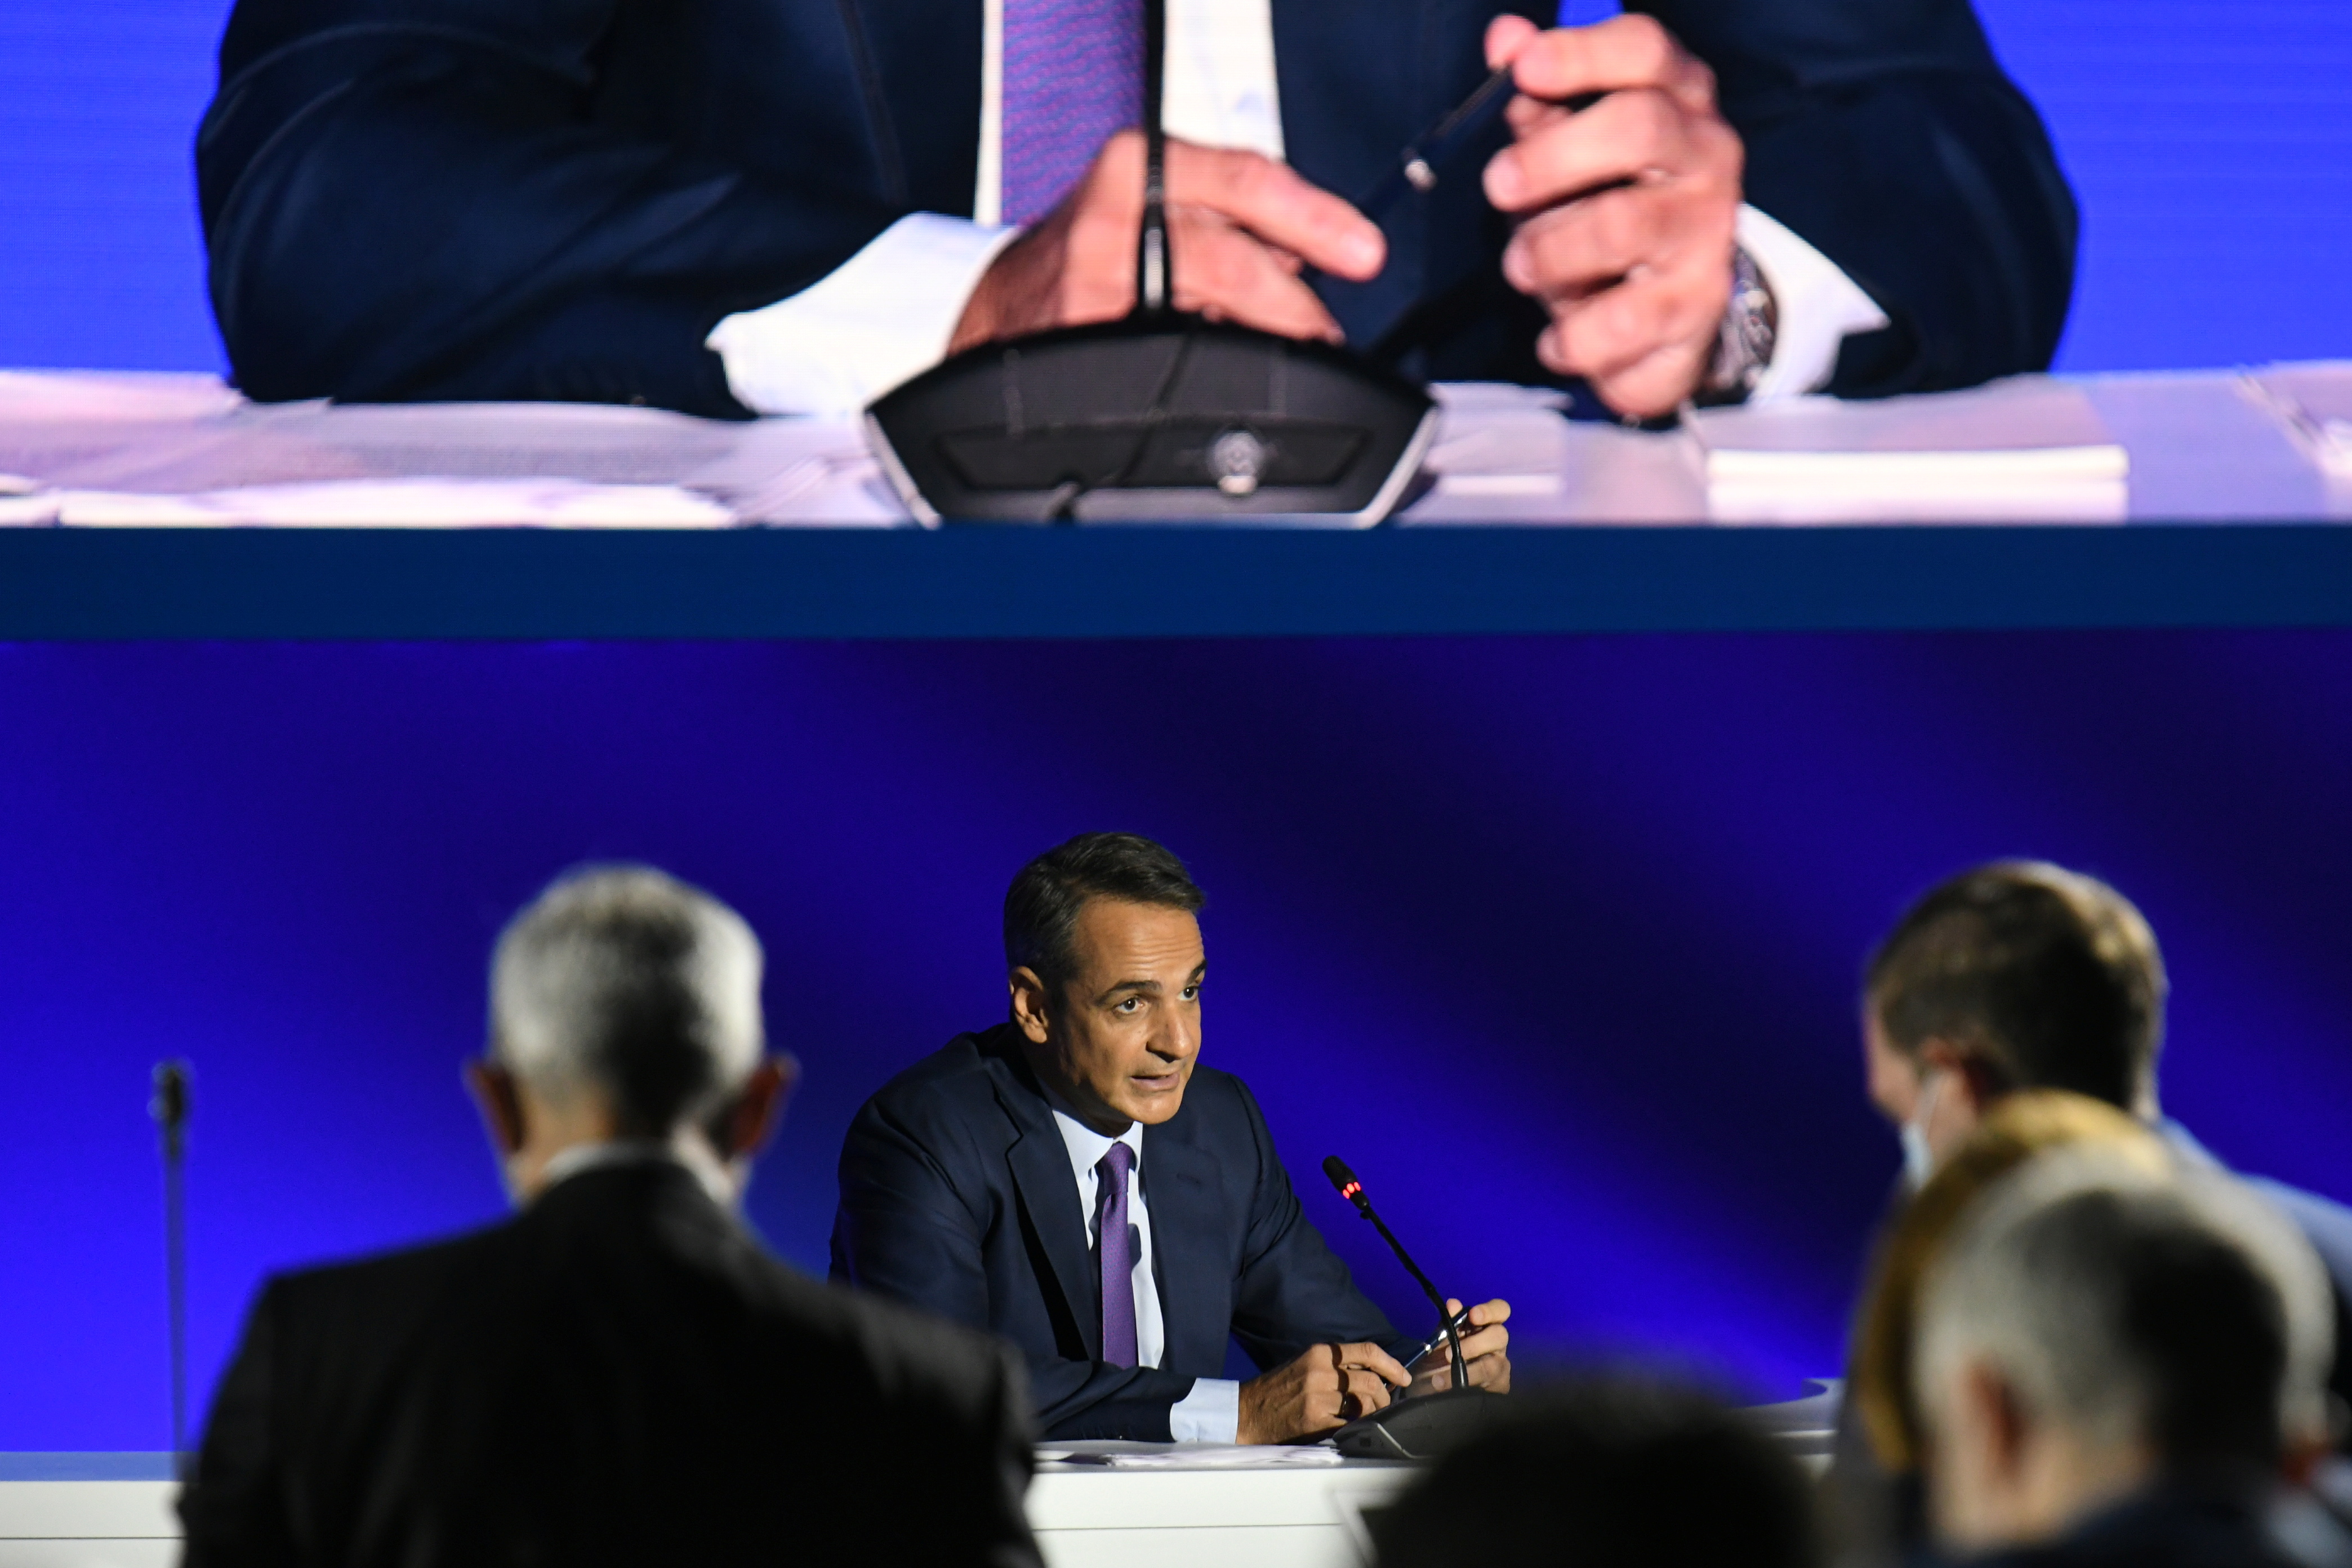 Greek PM Mitsotakis' news conference in Thessaloniki